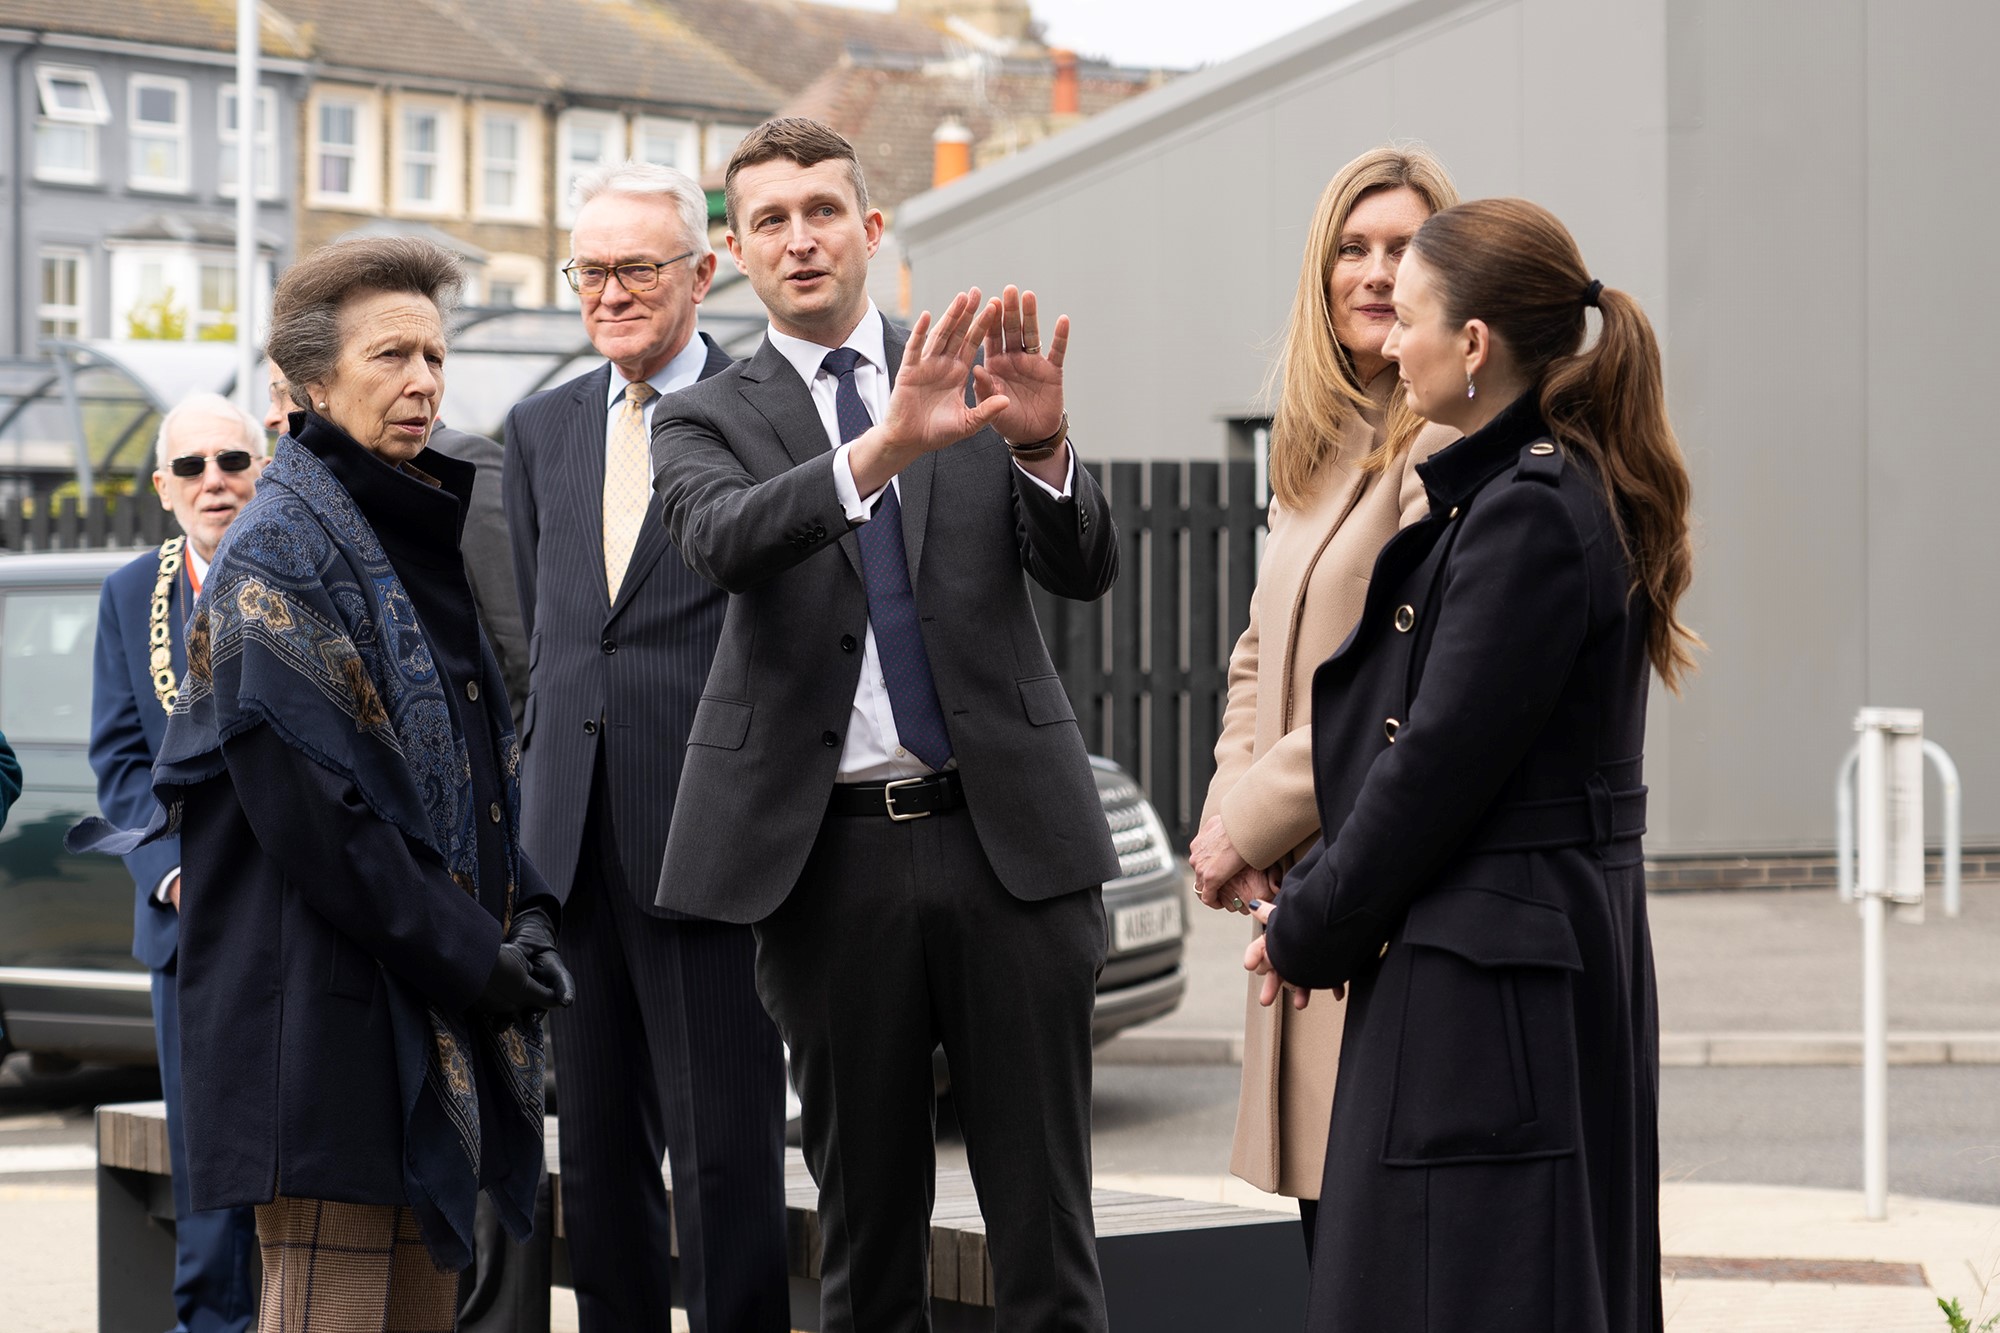 The Princess Royal arriving and is met by Neil Hornby (Cefas CEO), Dr Sian Limpenny ( Director of Strategy and Delivery) and Kelly Baker (Refurbishment project manager) and is shown the newly developed Cefas HQ.